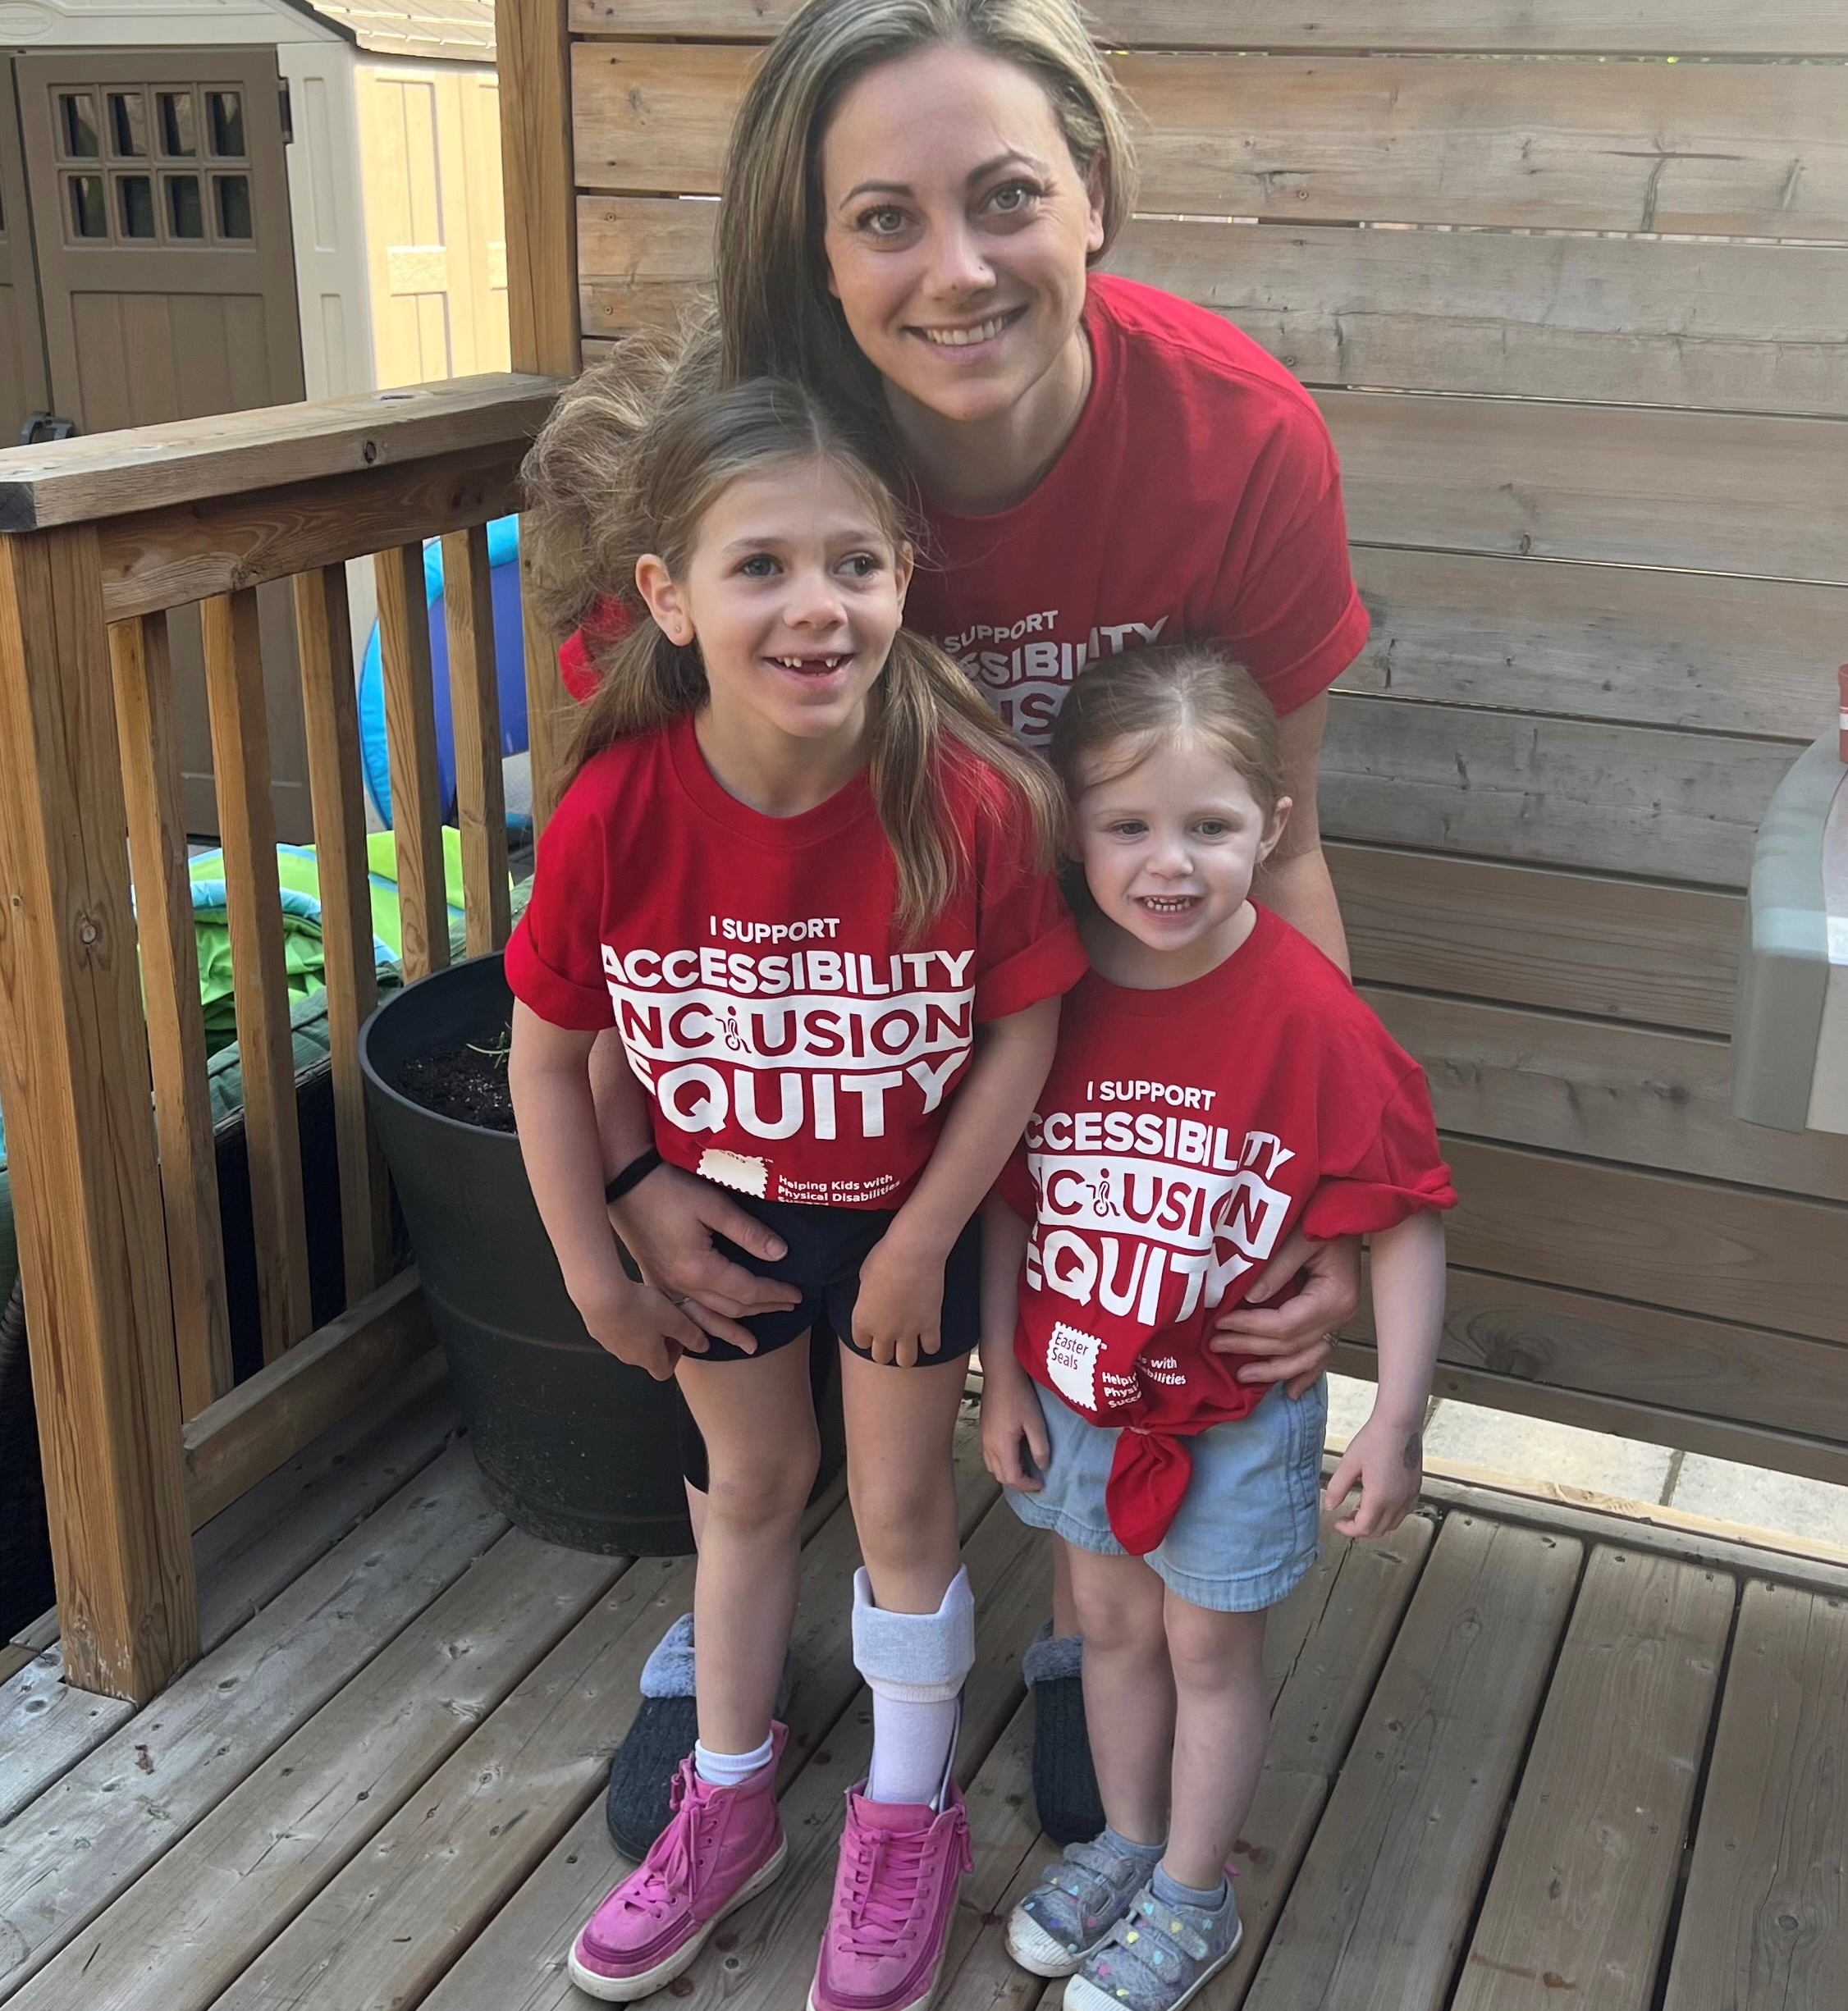 Mikayla poses with her mom, Amanda, and her little sister. They are wearing matching tshirts that read: "I support accessibility inclusion equity"